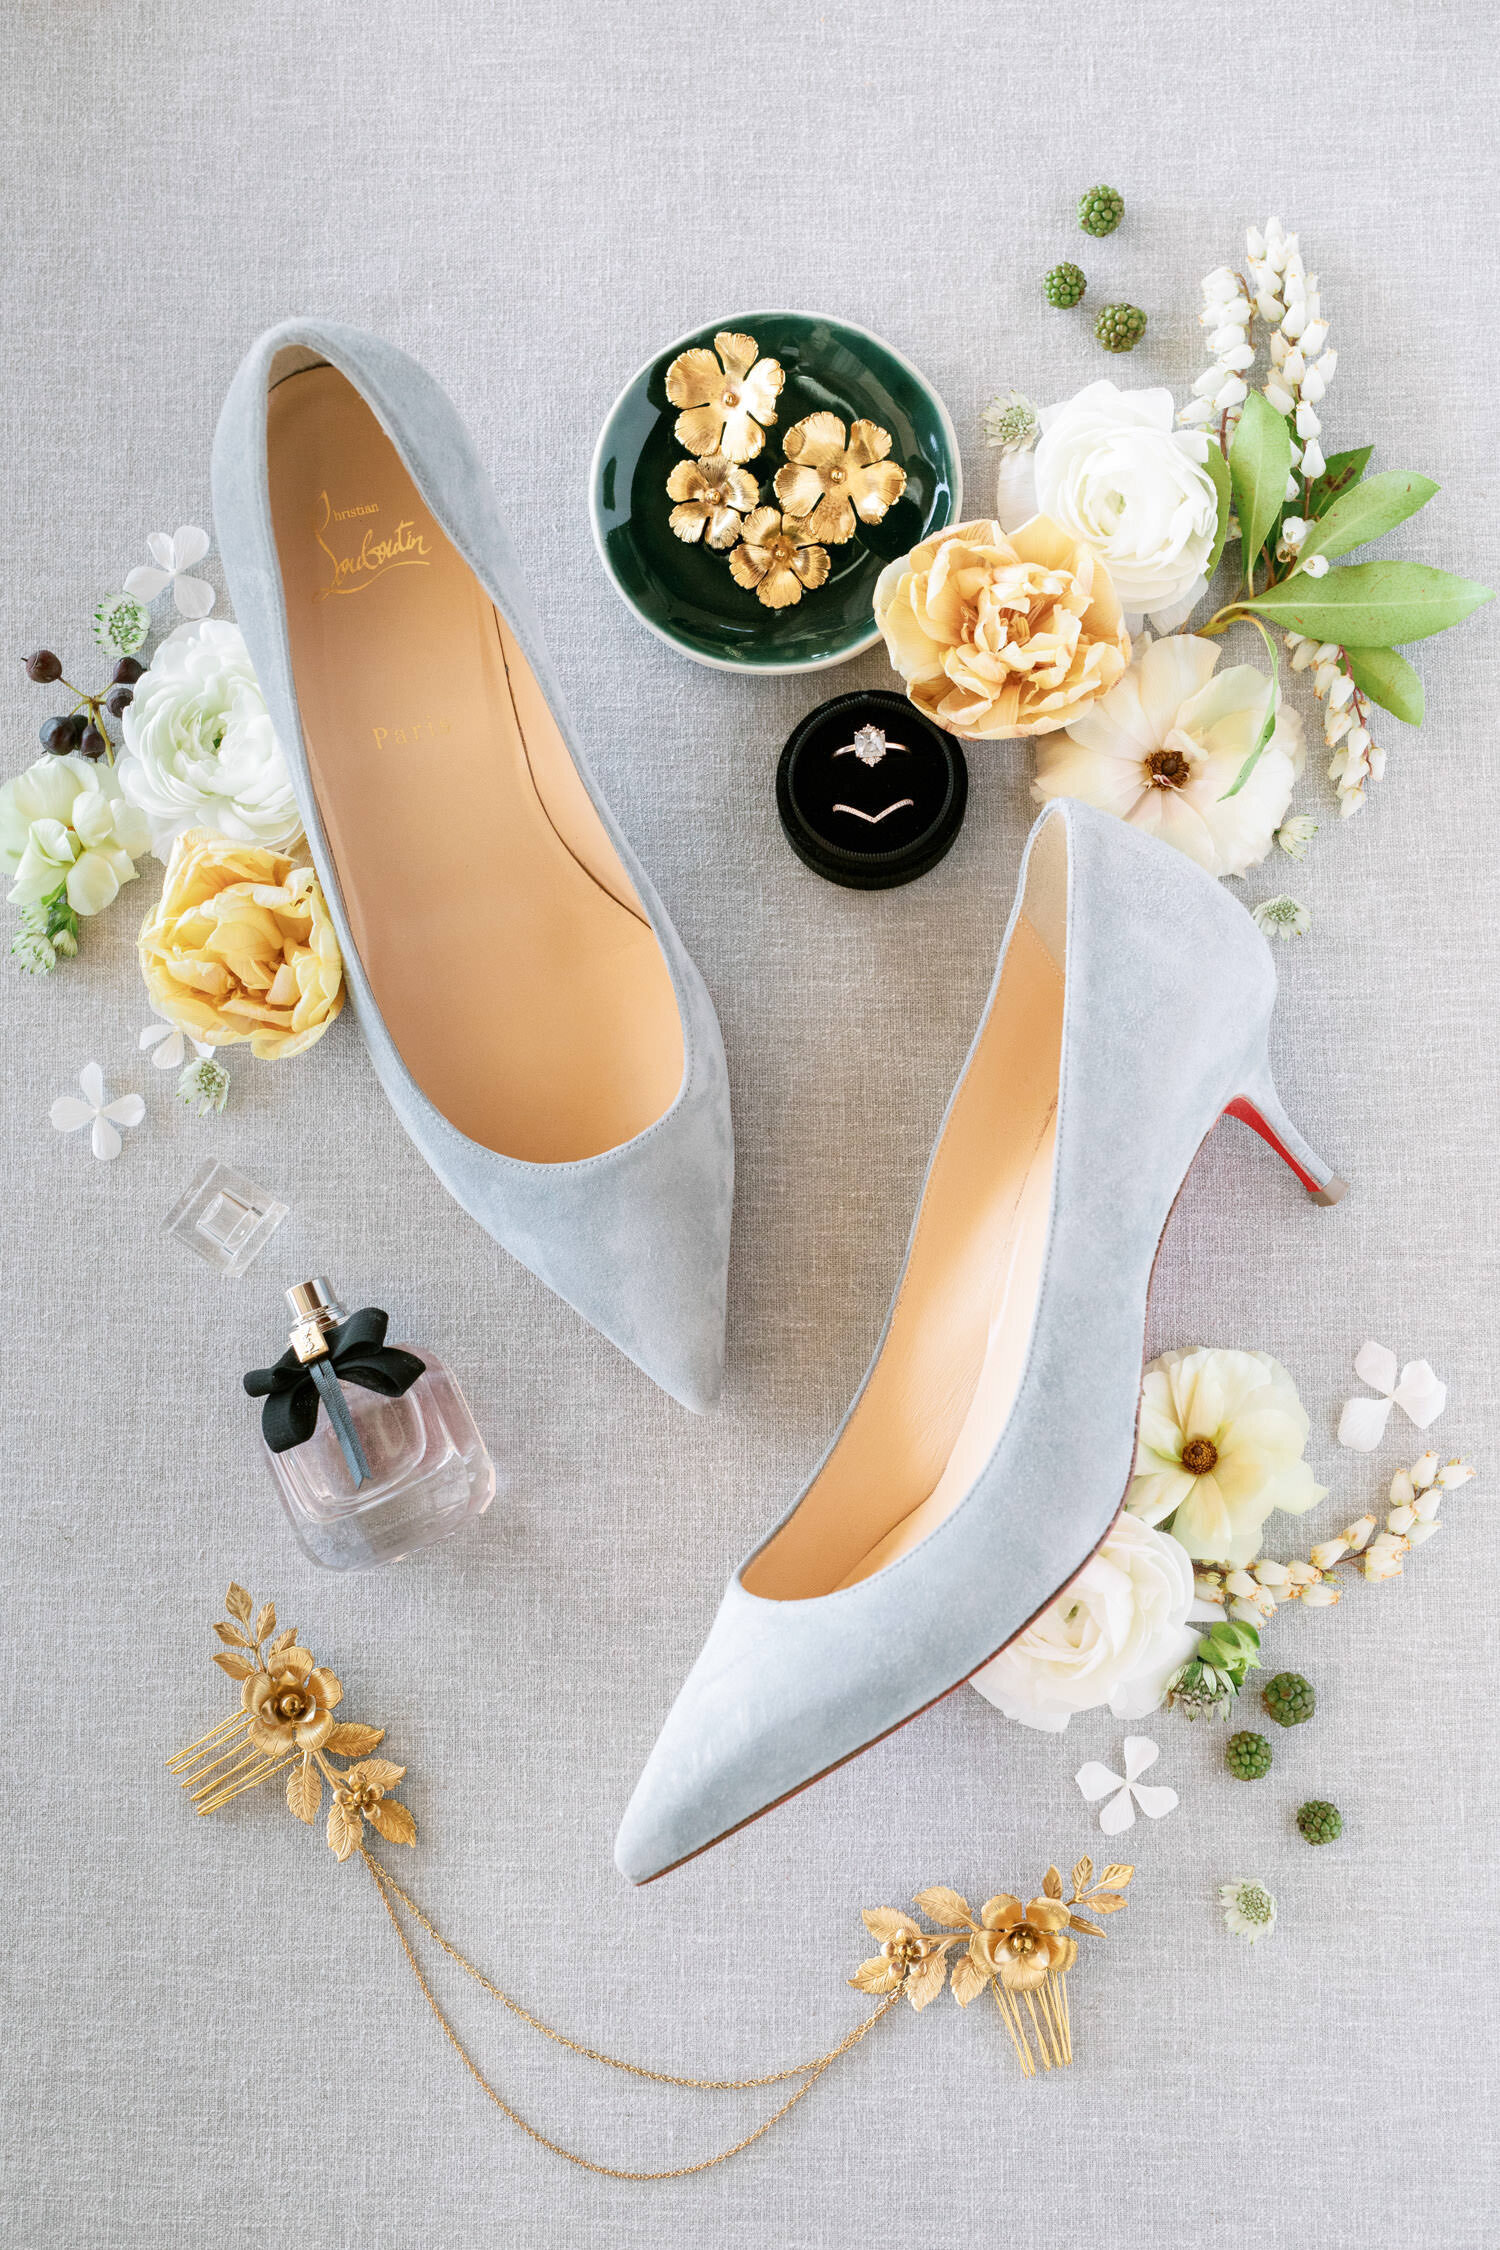 Wedding details including wedding rings, Christian Louboutin heels, perfume, and flowers